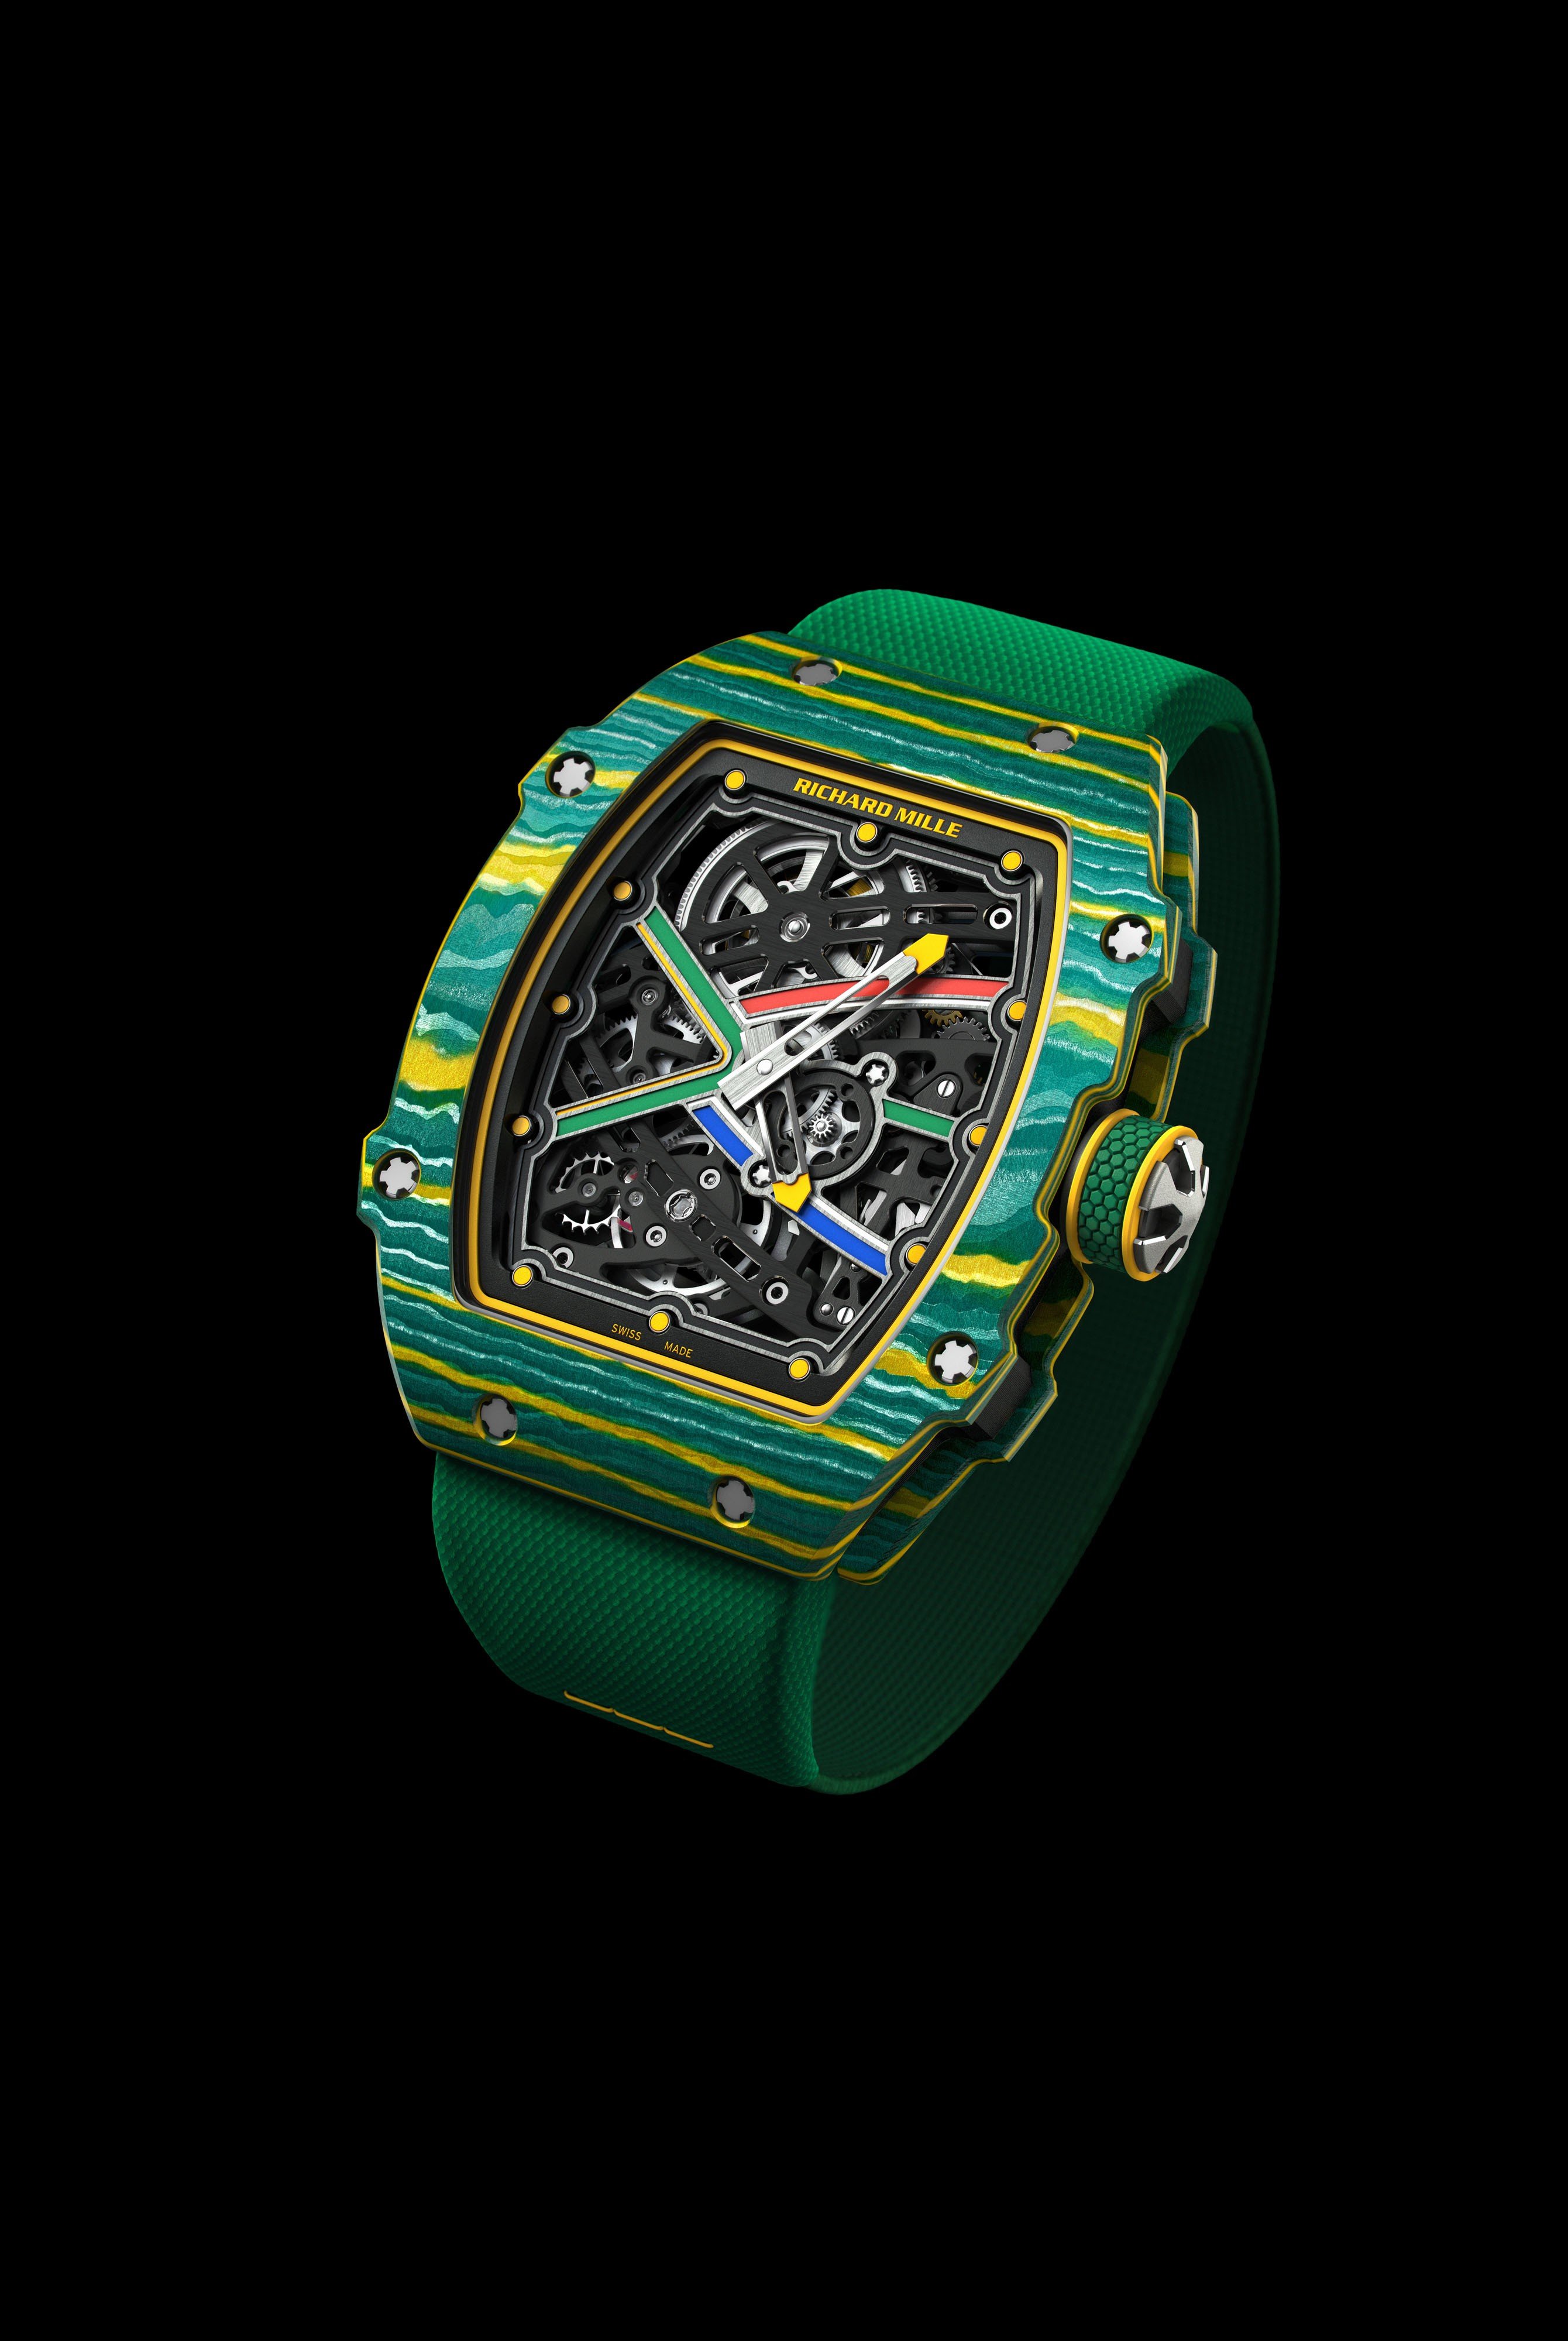 We love these watches from Bovet, Harry Winston, Richard Mille and more